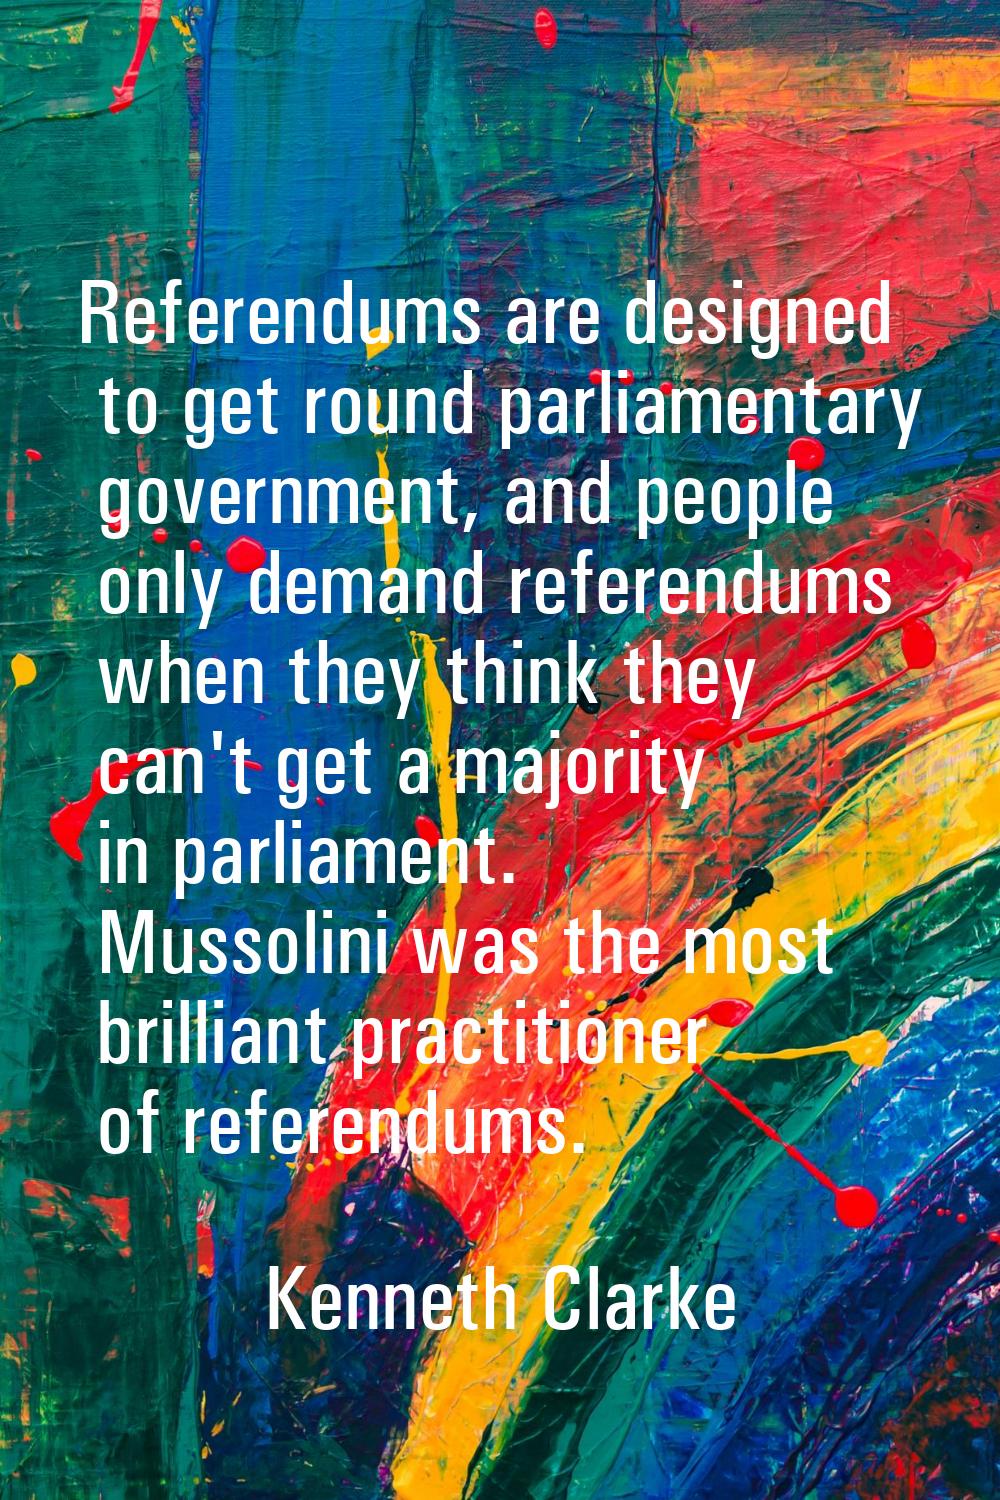 Referendums are designed to get round parliamentary government, and people only demand referendums 